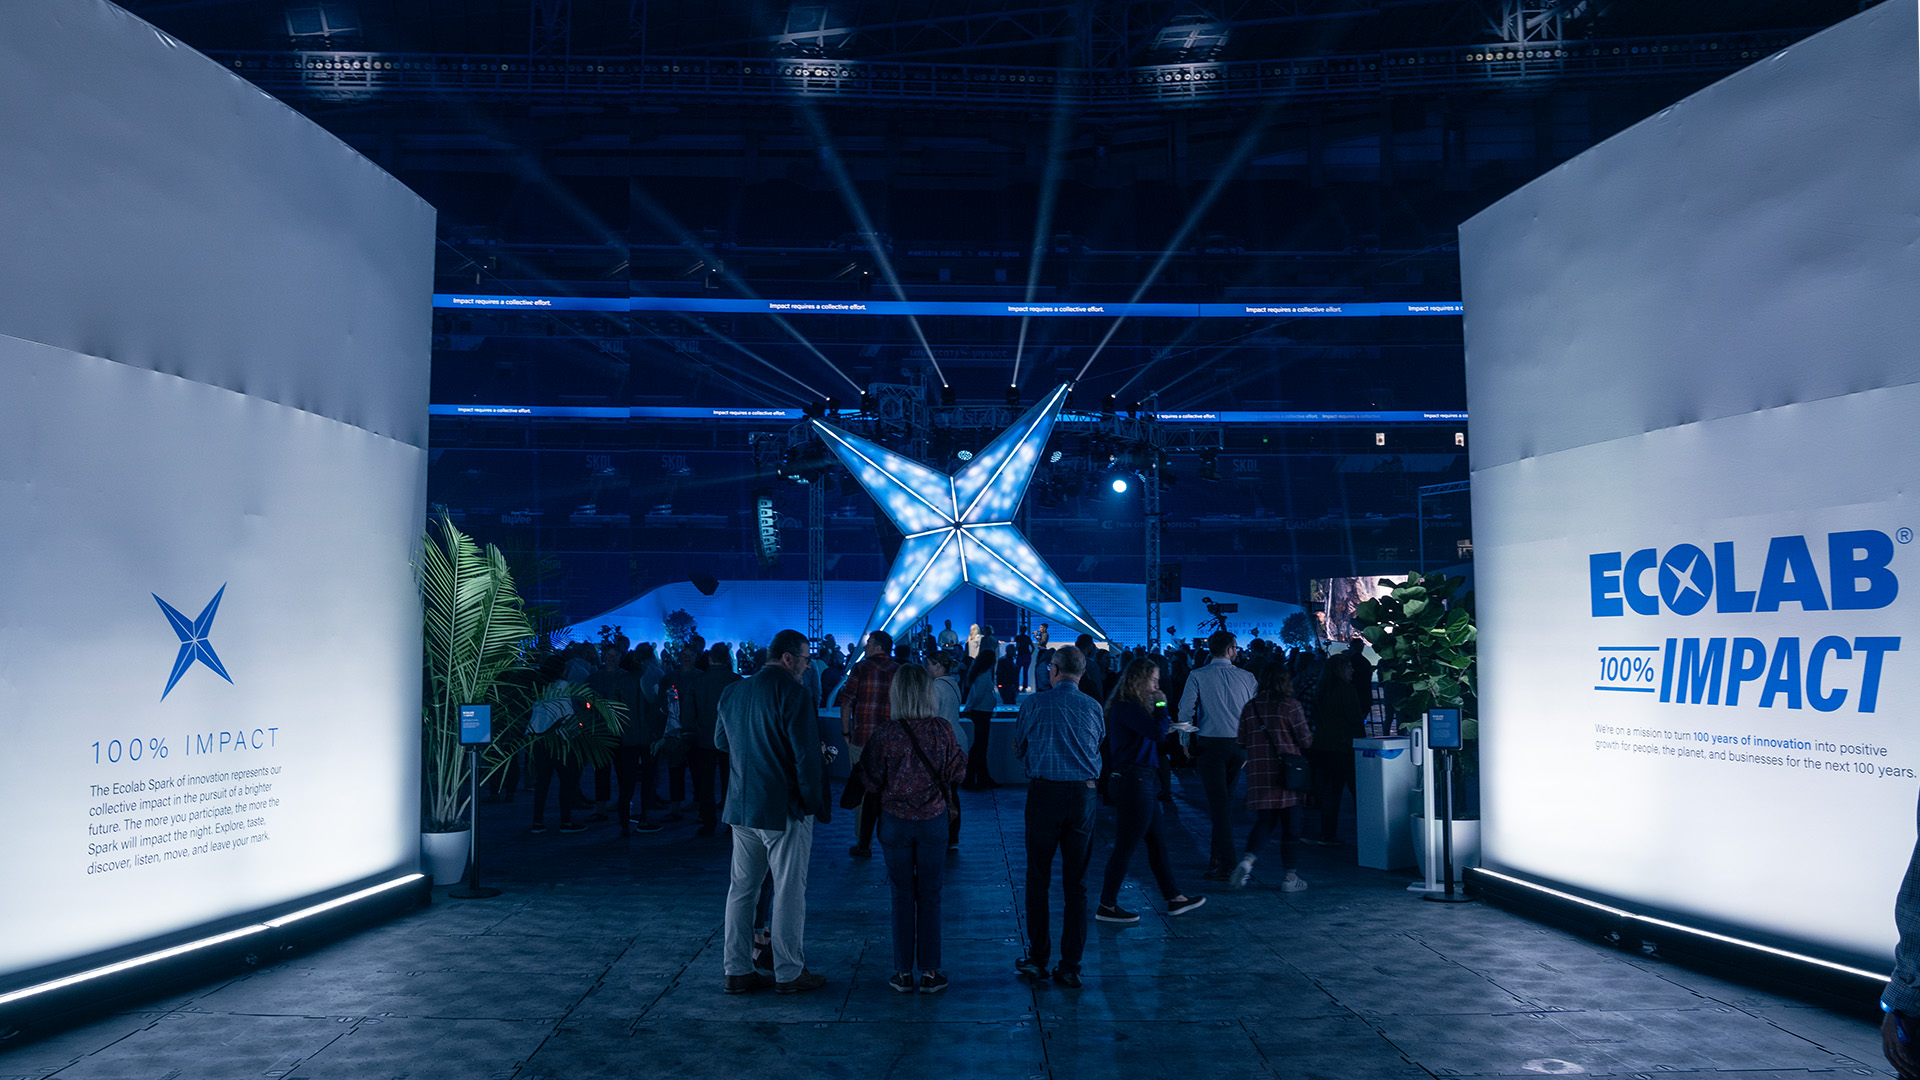 A photo of the entrance at the 100 year anniversary of Ecolab. The Spark is at the center of the image, and people are standing in a semicircle around it. Some are looking at the sculpture. Some are smiling and talking